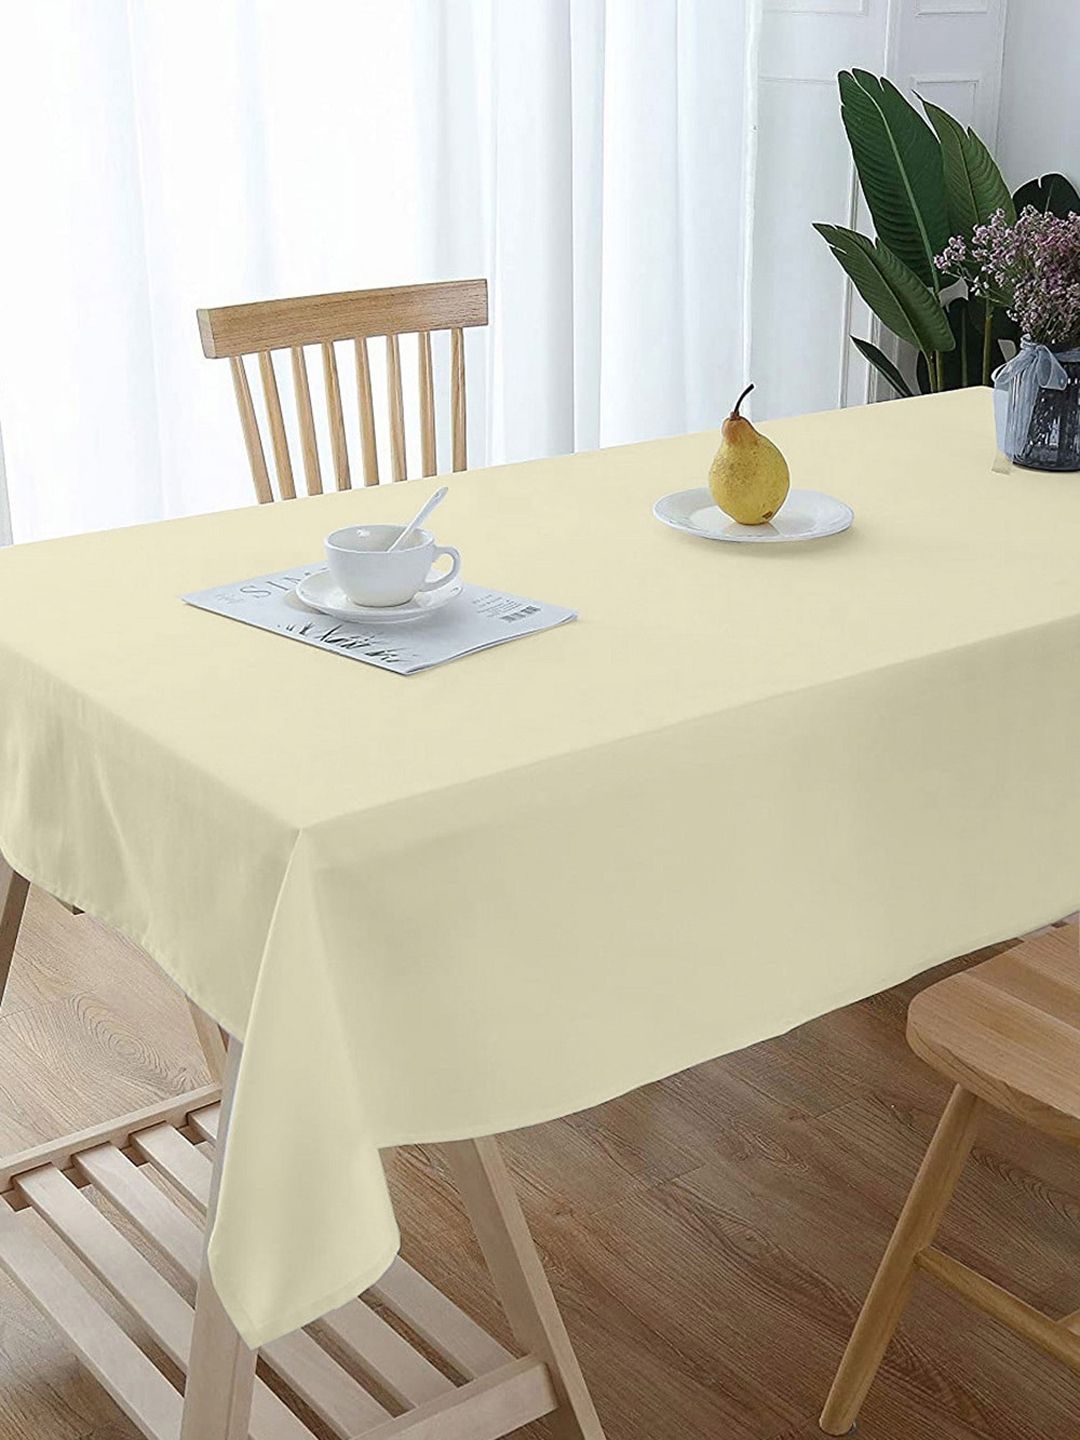 Lushomes Beige Classic Plain 6 Seater Dining Table Cloth Price in India